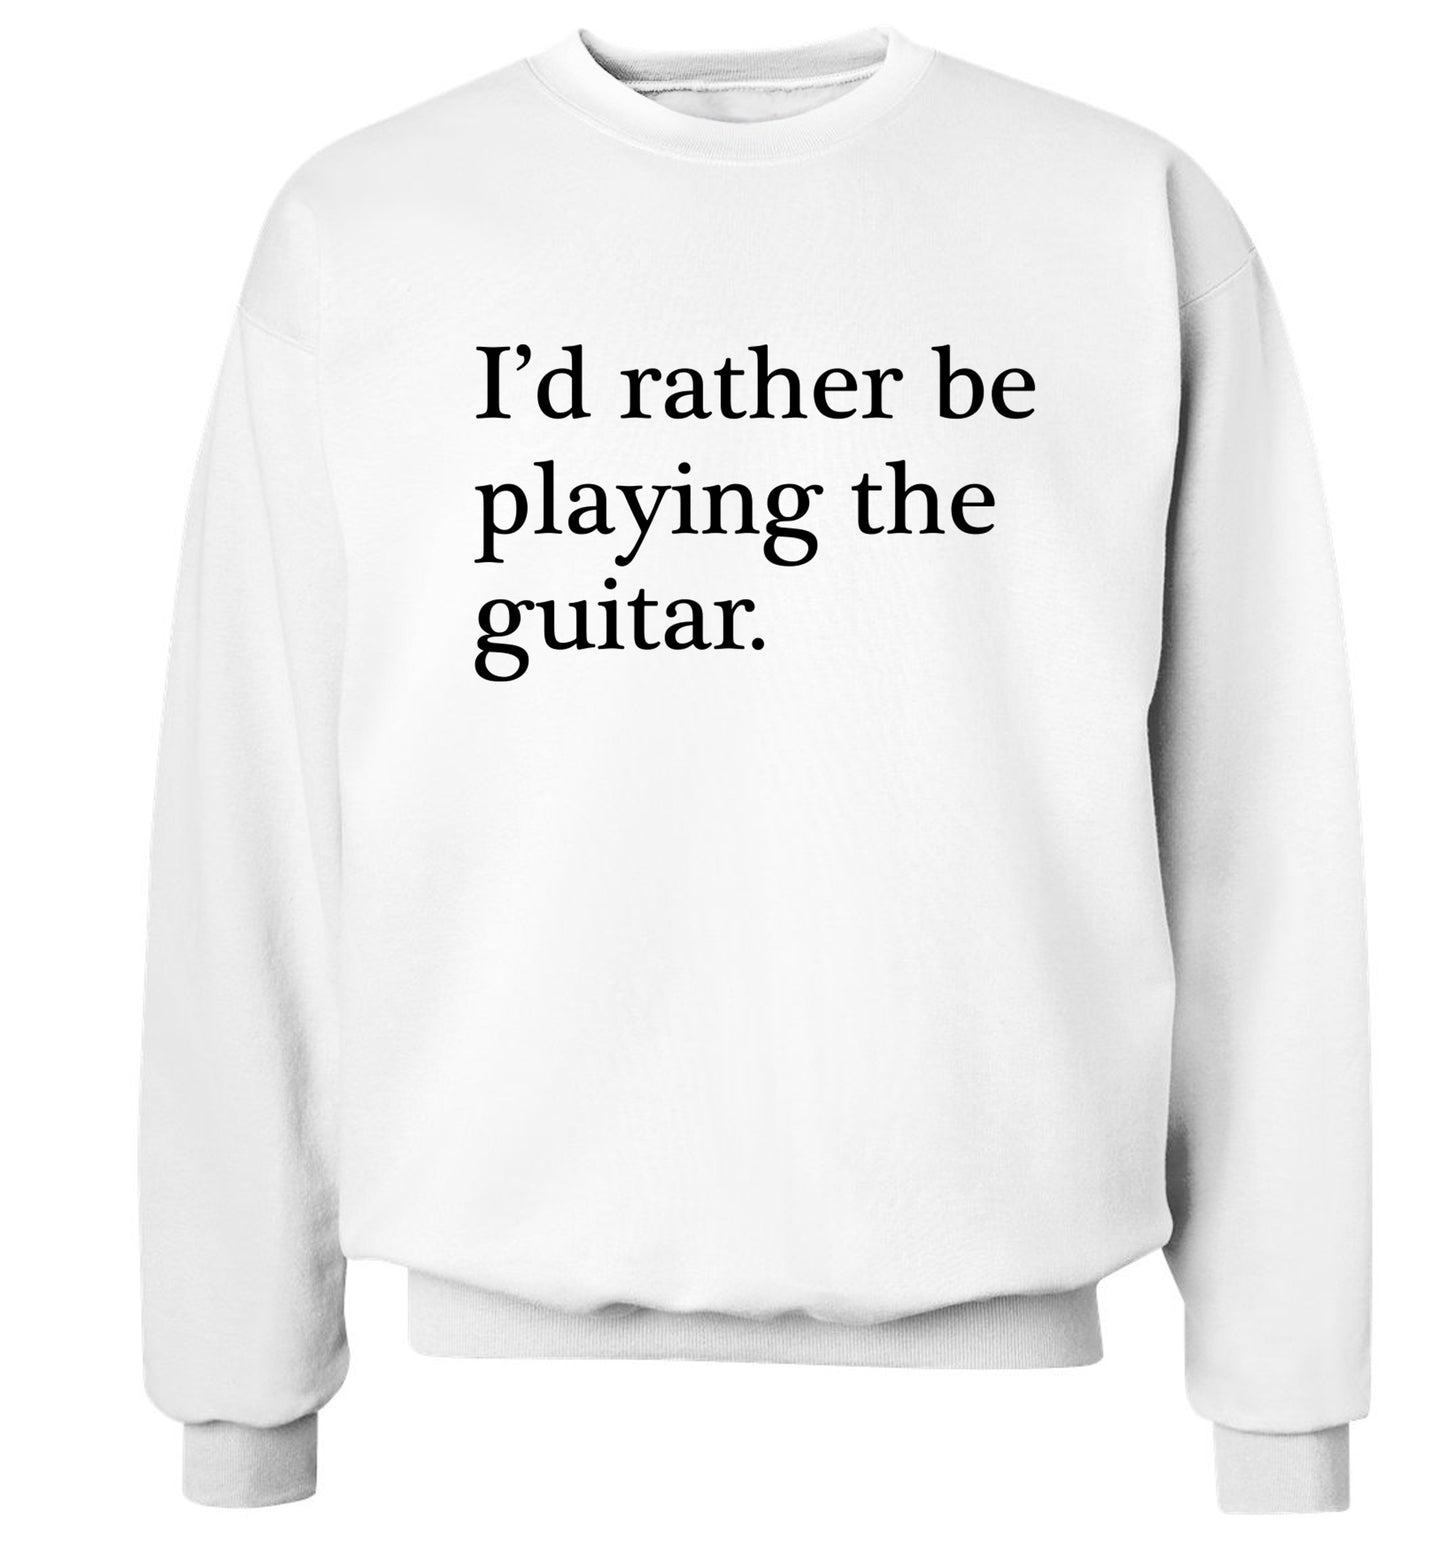 I'd rather be playing the guitar Adult's unisex white Sweater 2XL